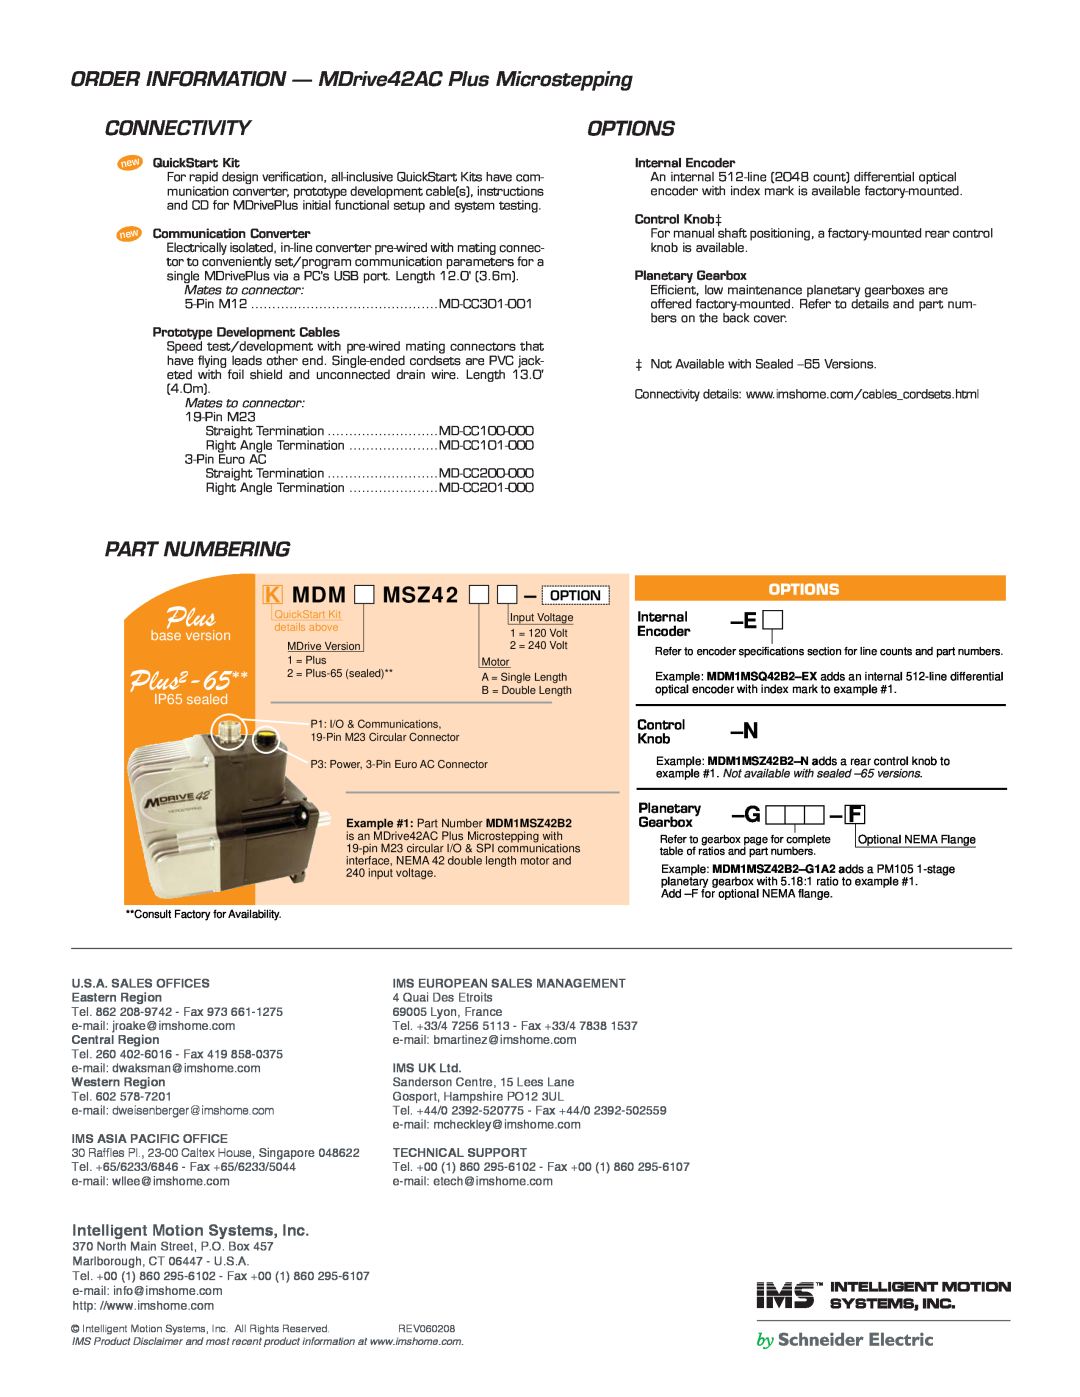 Intelligent Motion Systems MDM42 AC ORDER INFORMATION - MDrive42AC Plus Microstepping, Connectivity, Options, Plus2-65 